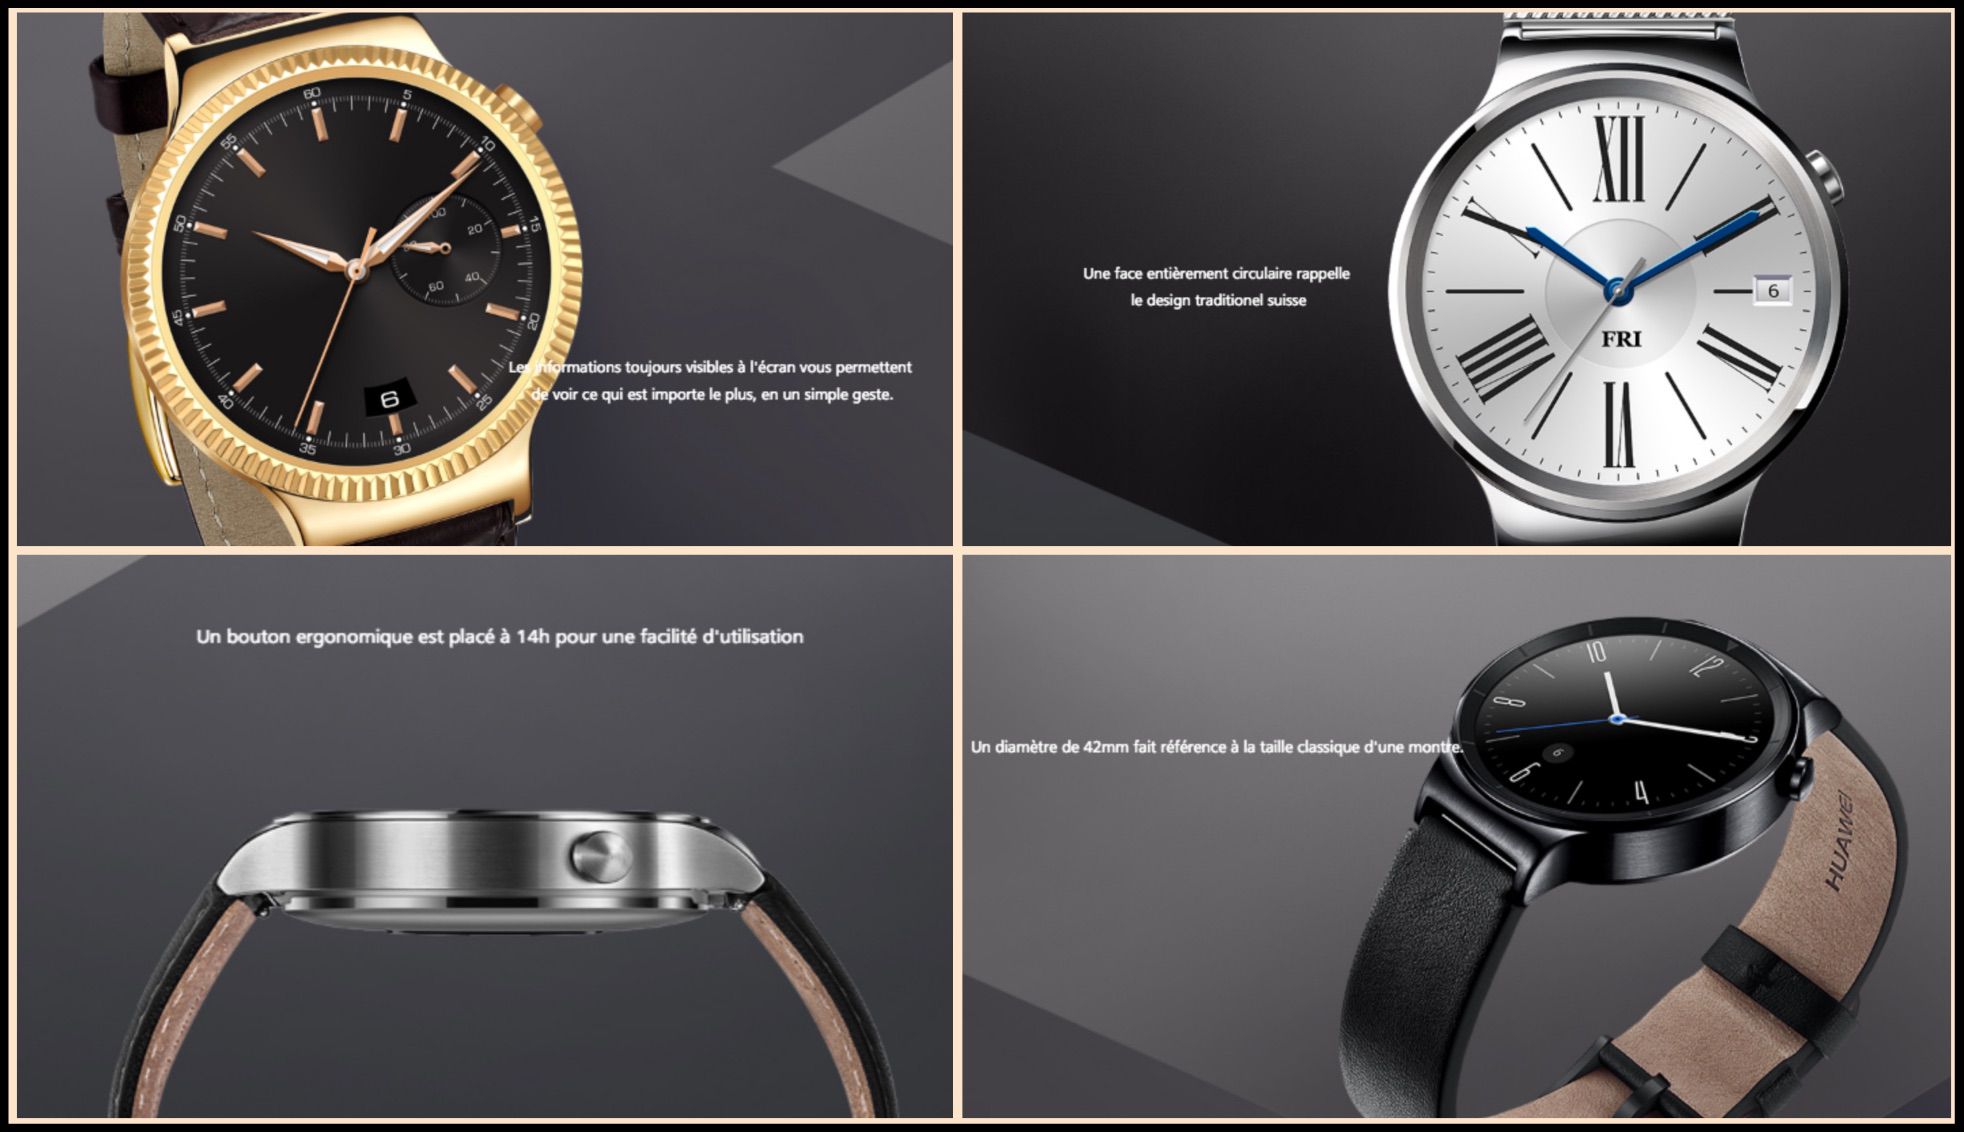 montre connectée HUAWEI Watch montre chinoise